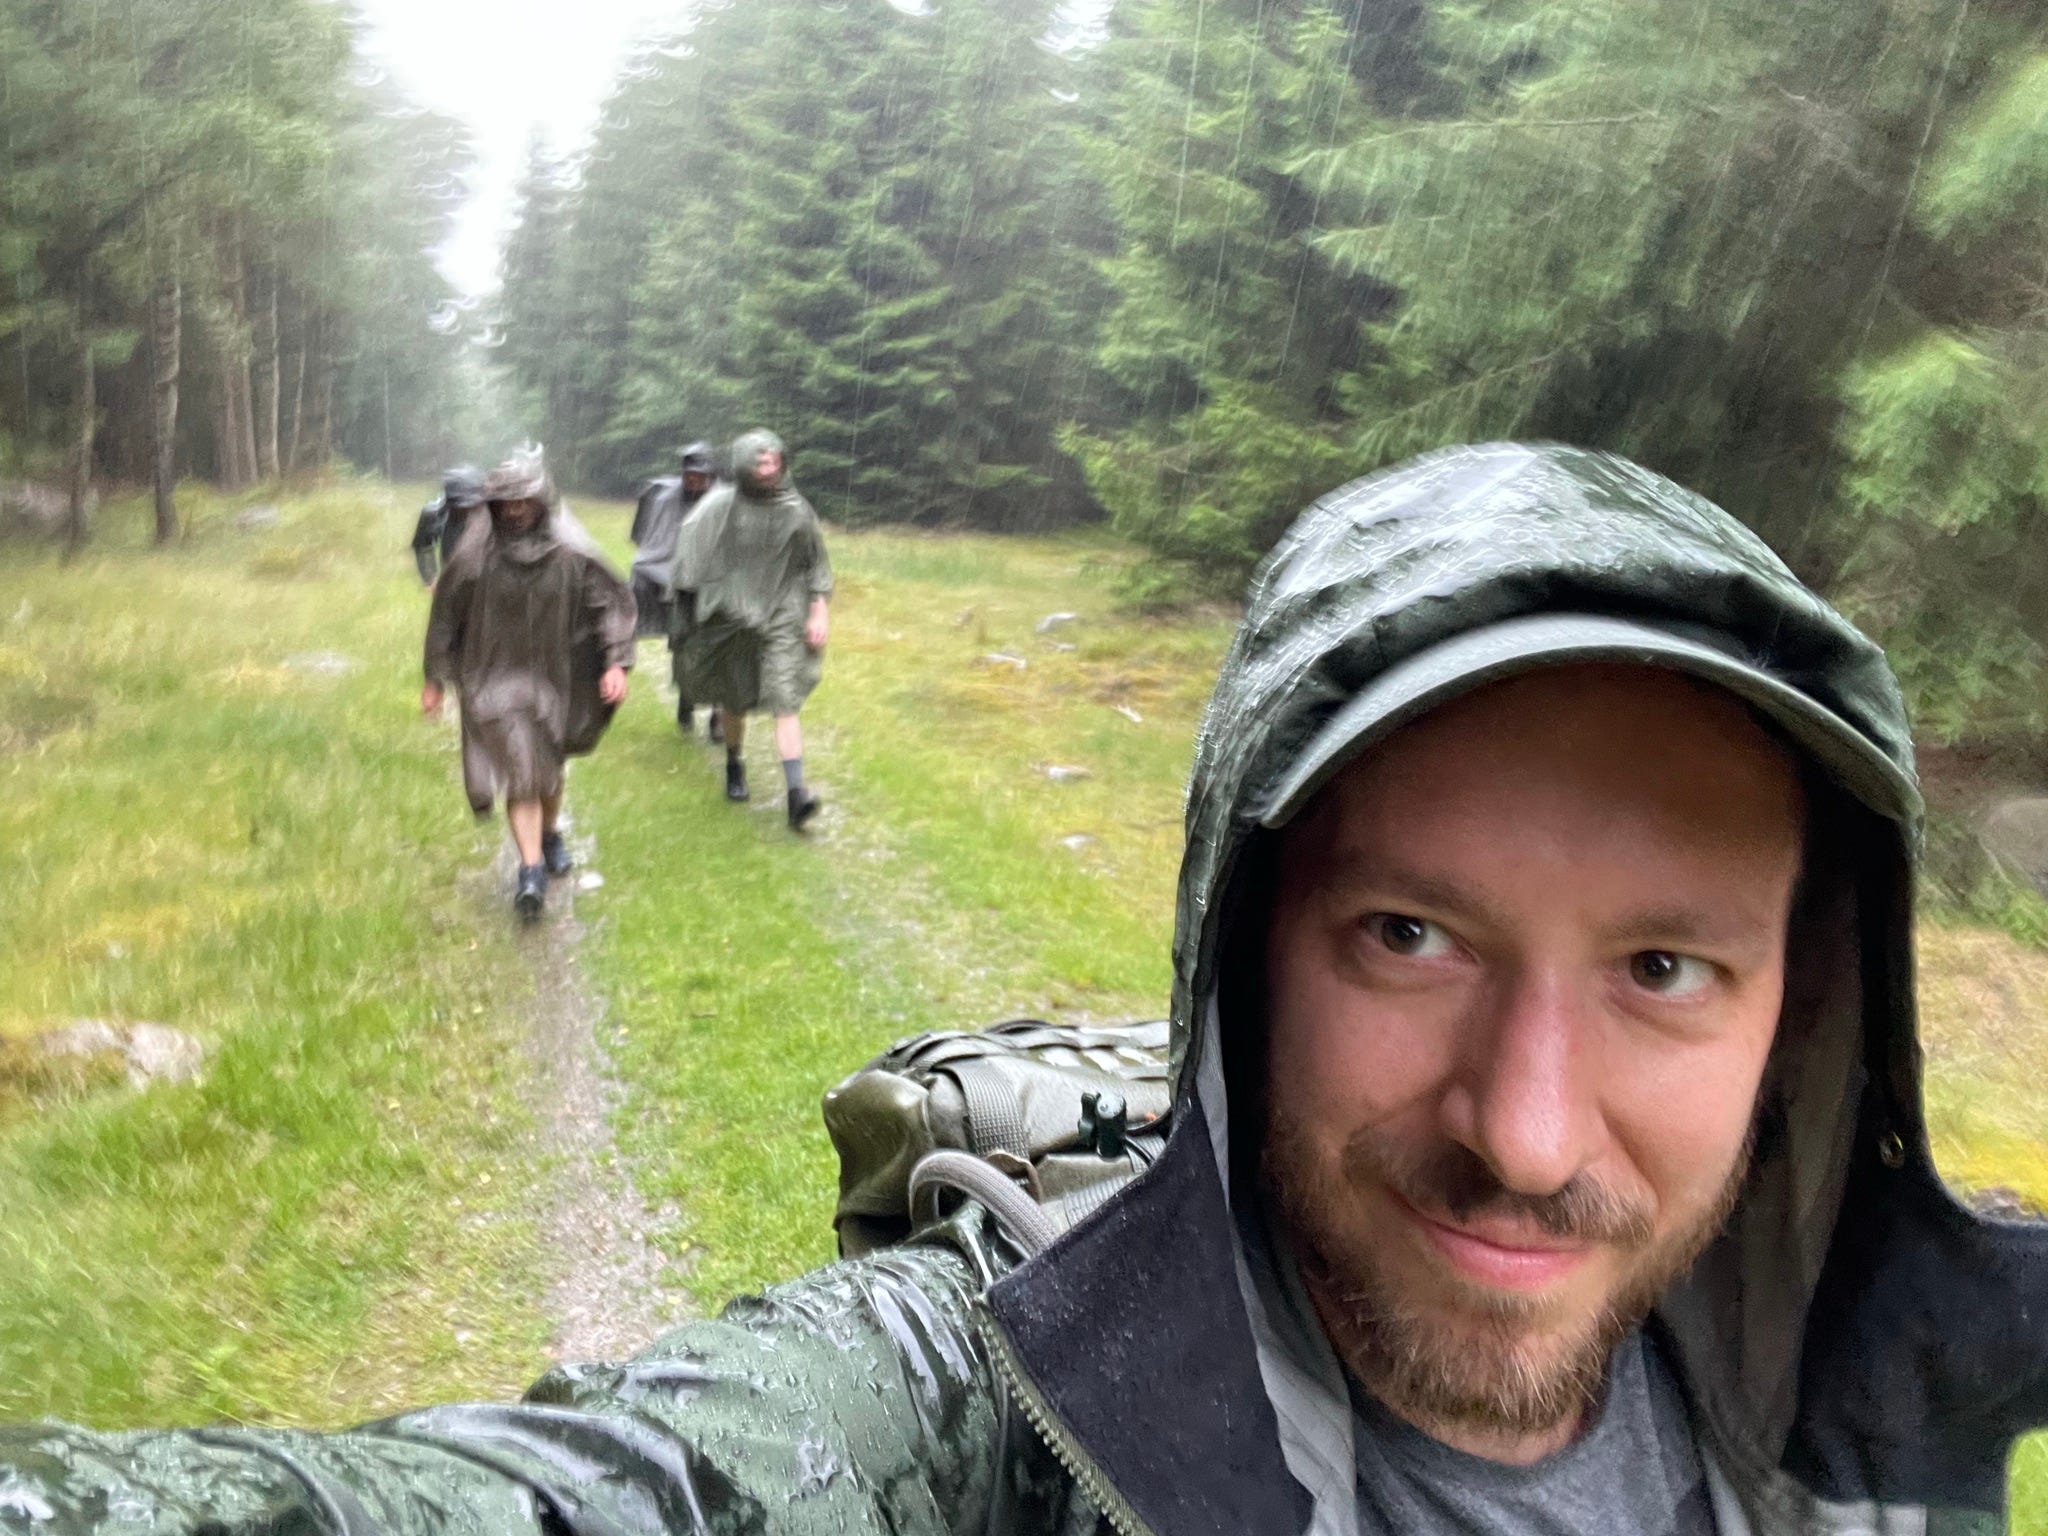 rucking in the rain is one of the best forms of rucking!